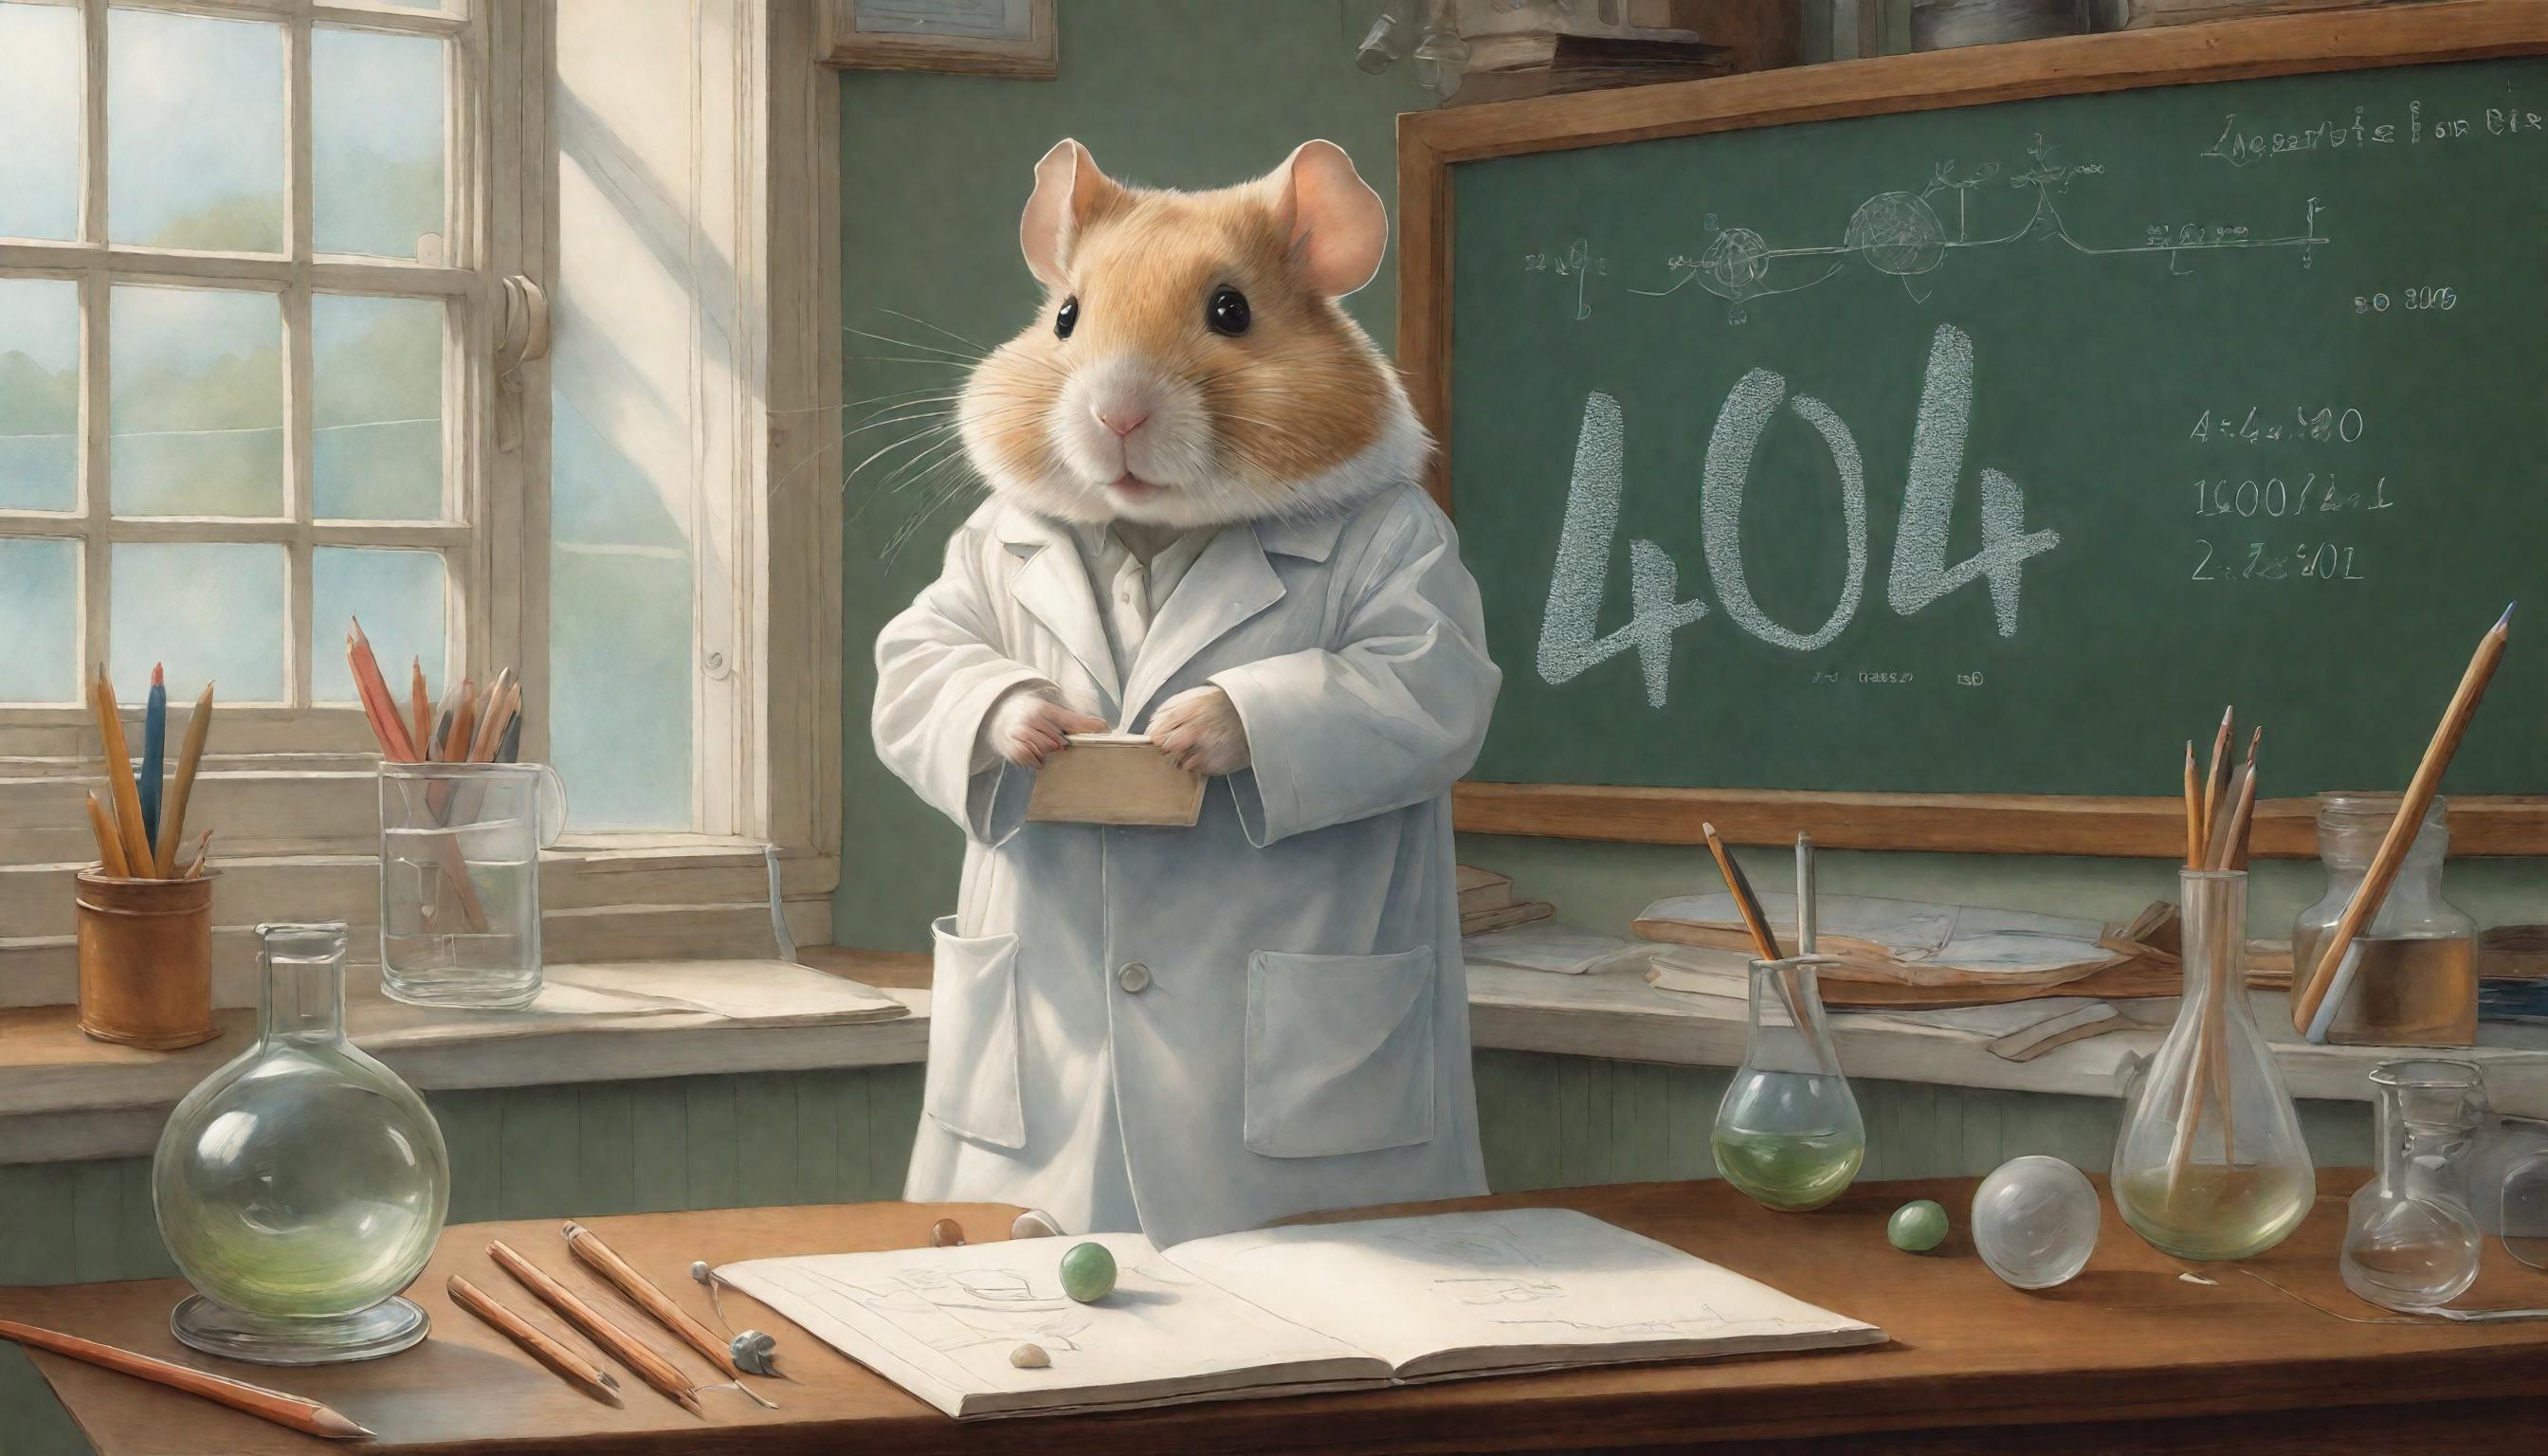 A hamster in a white lab coat standing in front of a chalkboard with the number 404.